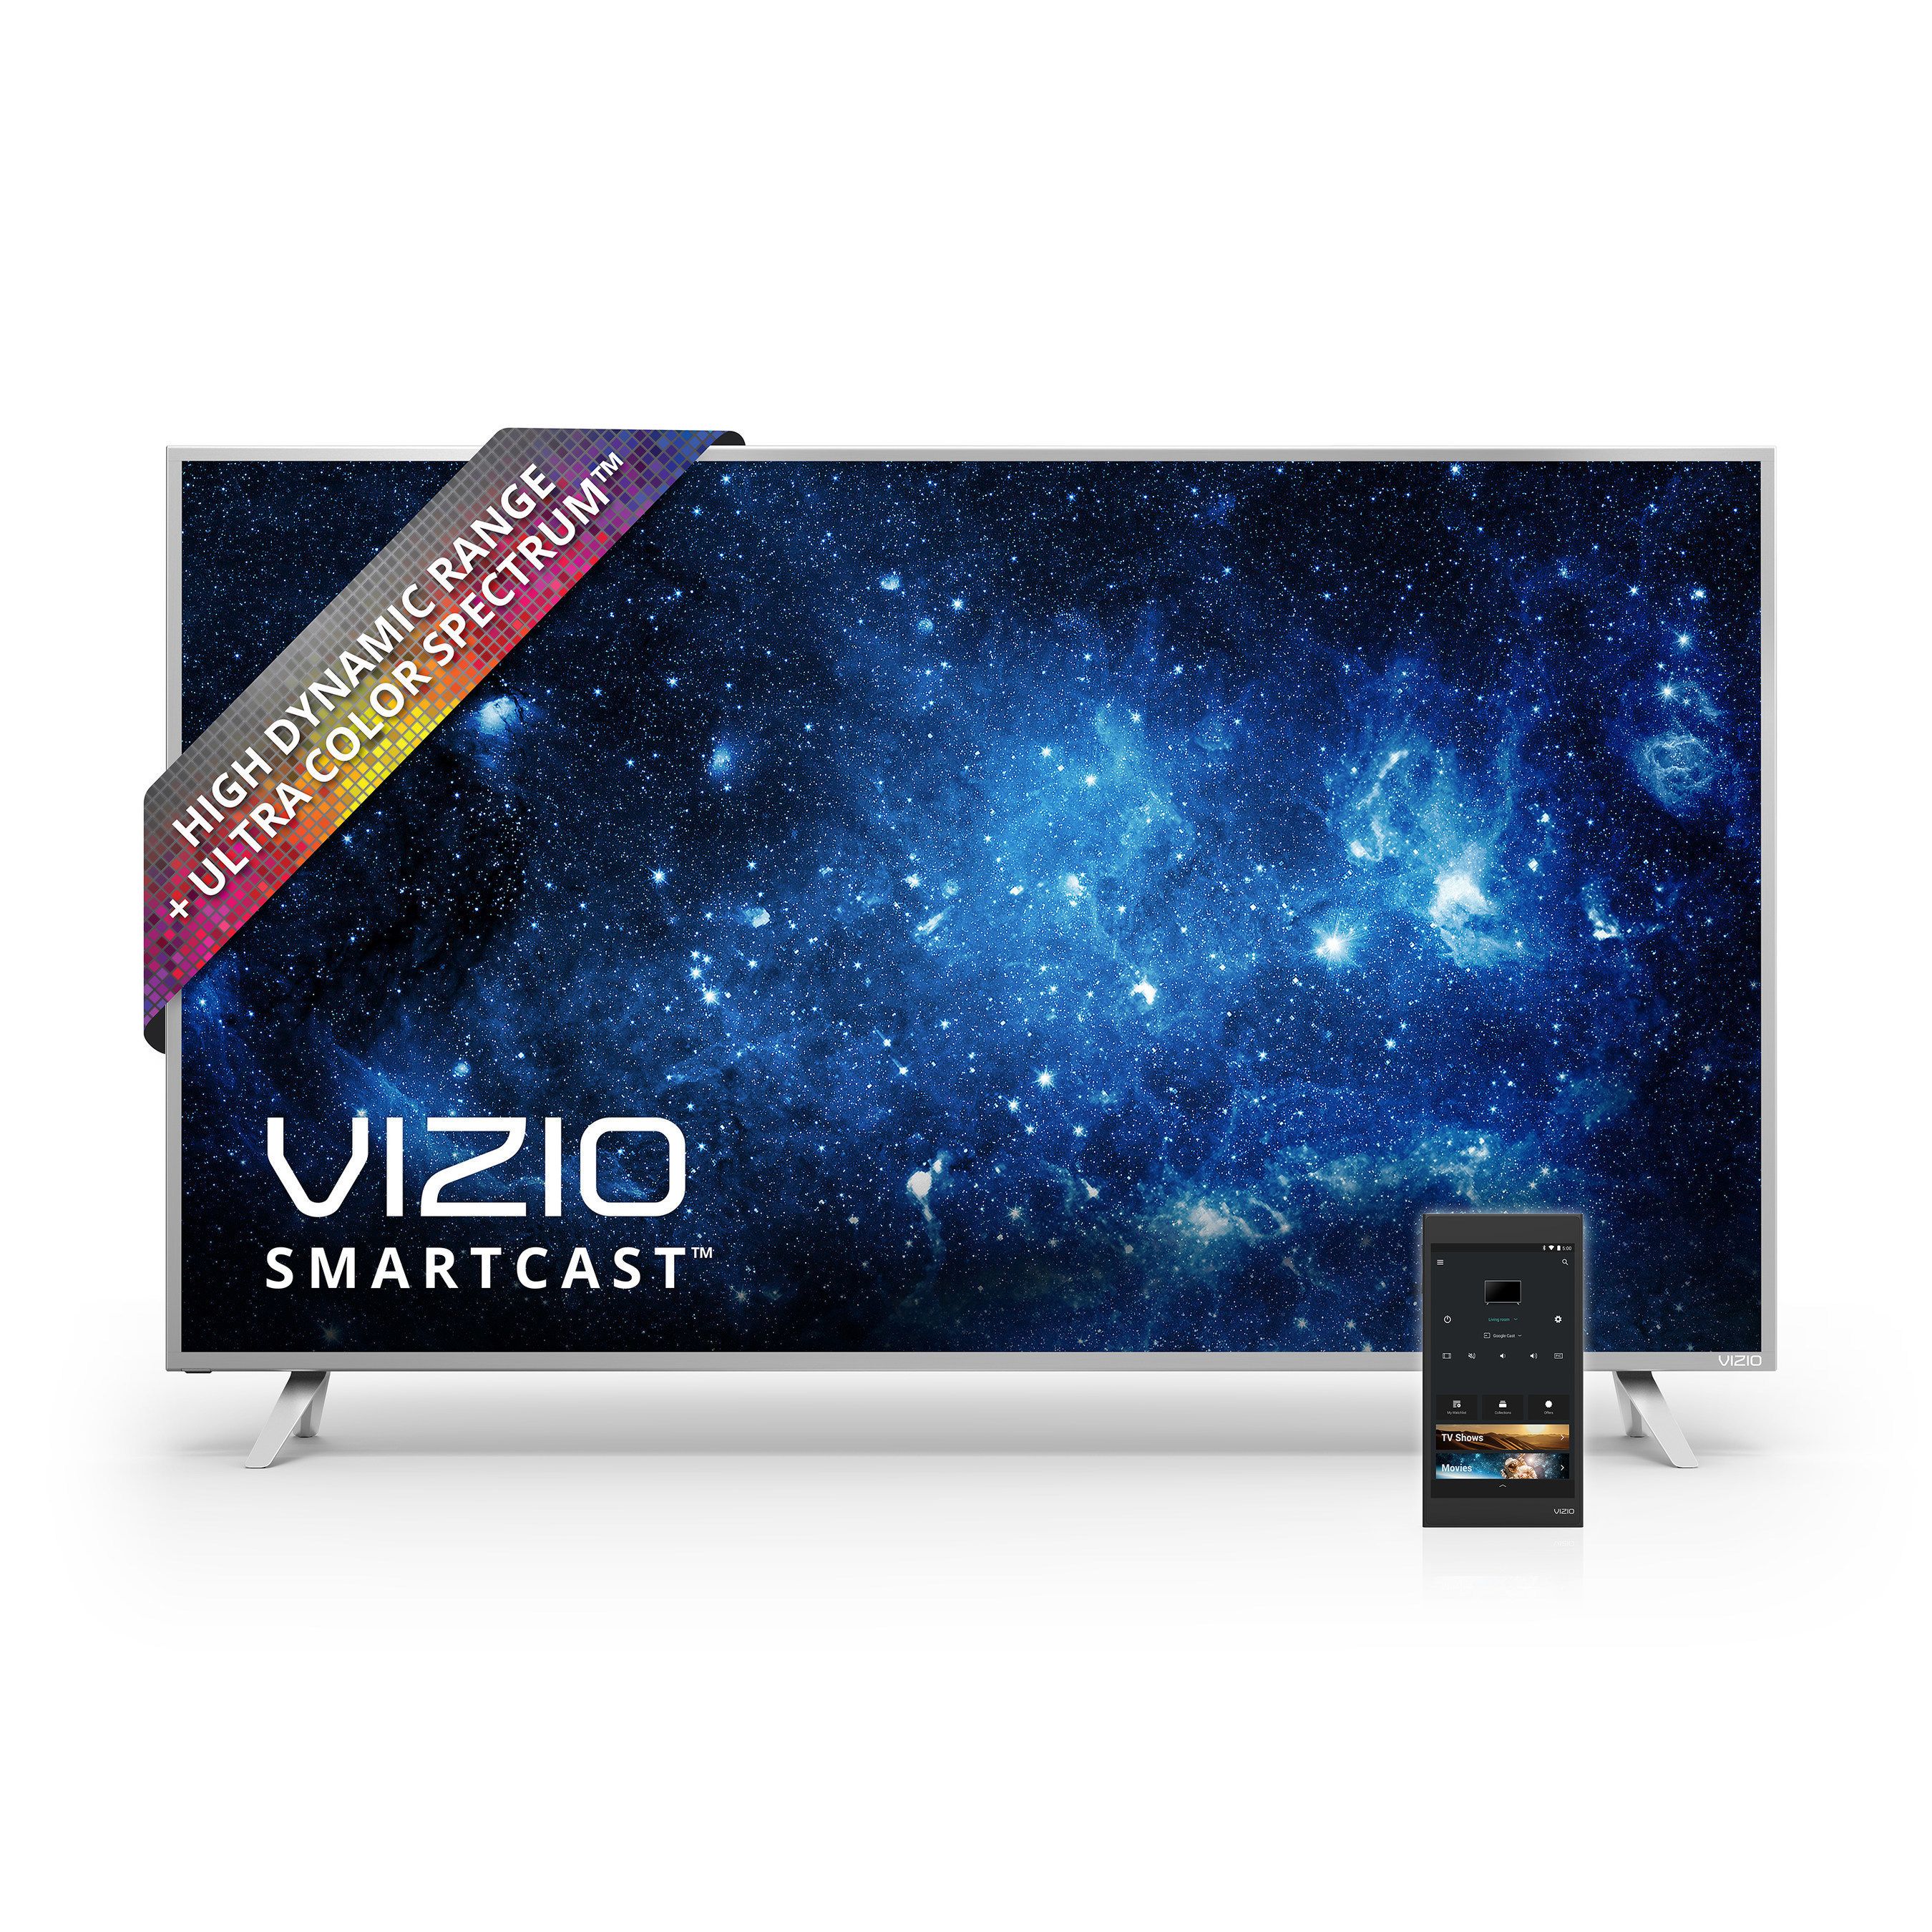 VIZIO Begins Roll Out of Updated Firmware for VIZIO SmartCast P-Series and  M-Series Ultra HD HDR Home Theater Displays to Support HDR10 Format. New Update Enables Support for Existing HDR Blu-ray Players and Continues Support for Expanded Collection of Dolby Vision HDR Titles Available Through Popular Streaming App VUDU.